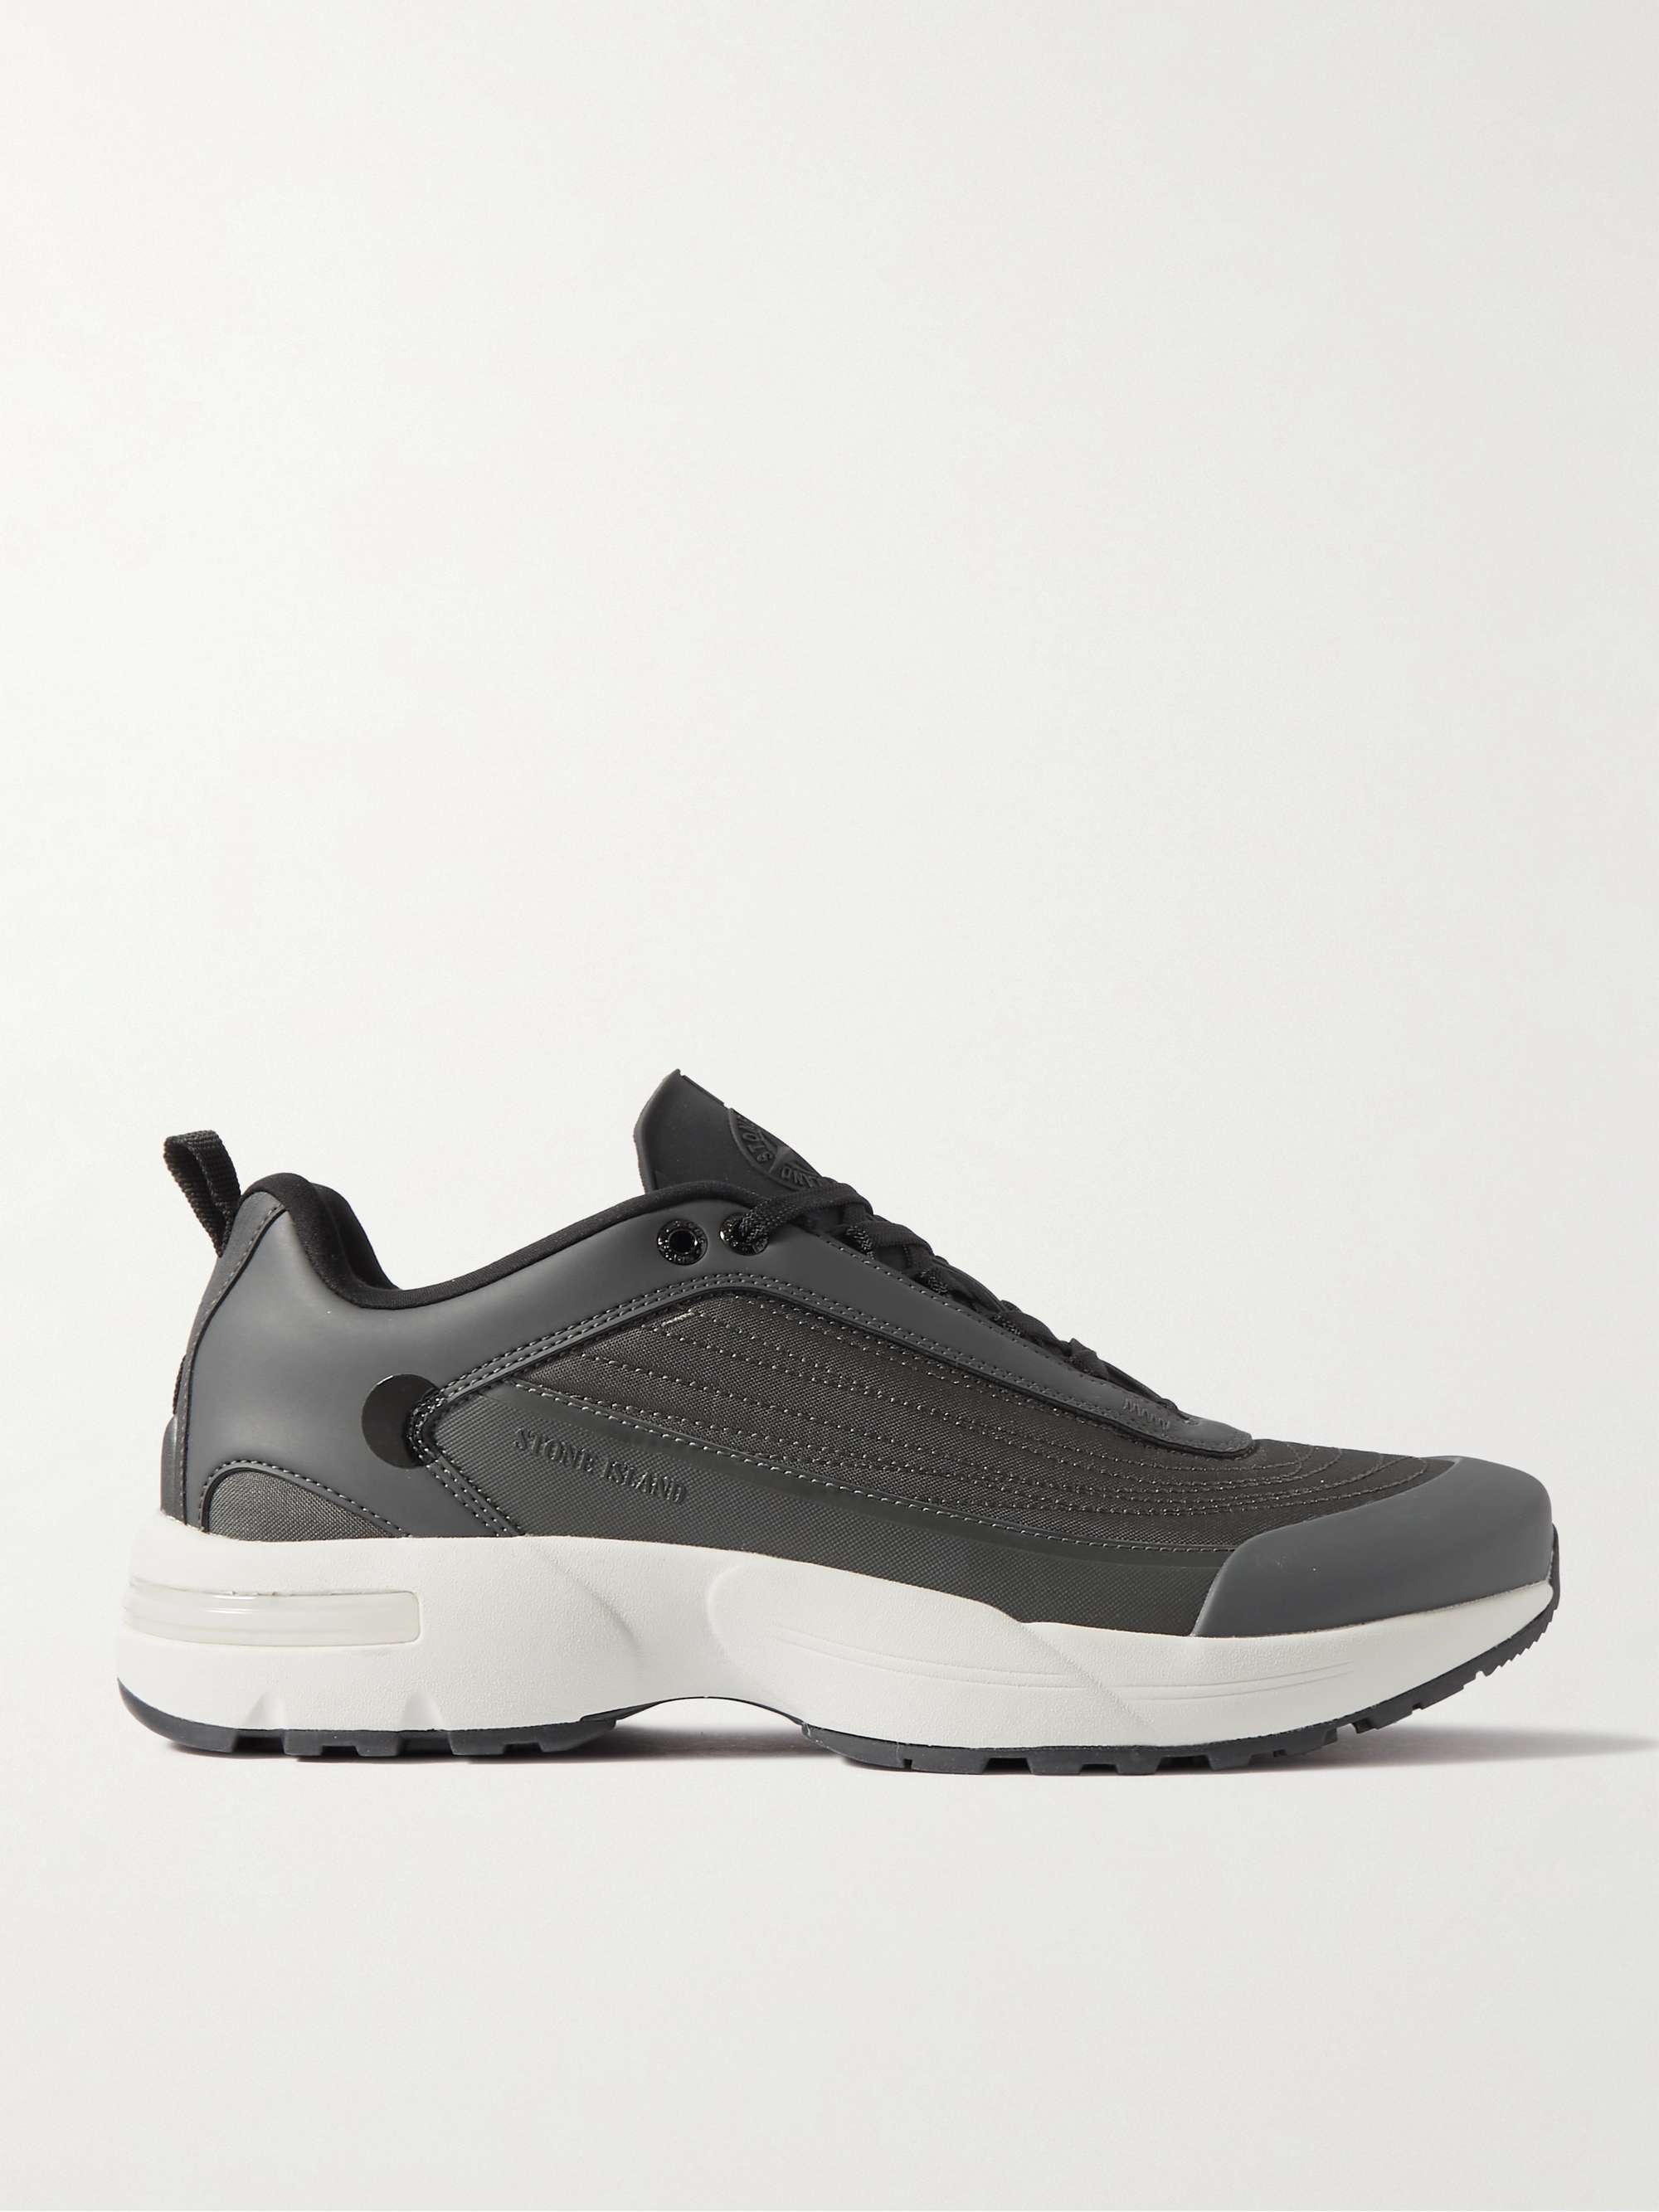 STONE ISLAND Grime Rubber-Trimmed Canvas Sneakers | MR PORTER